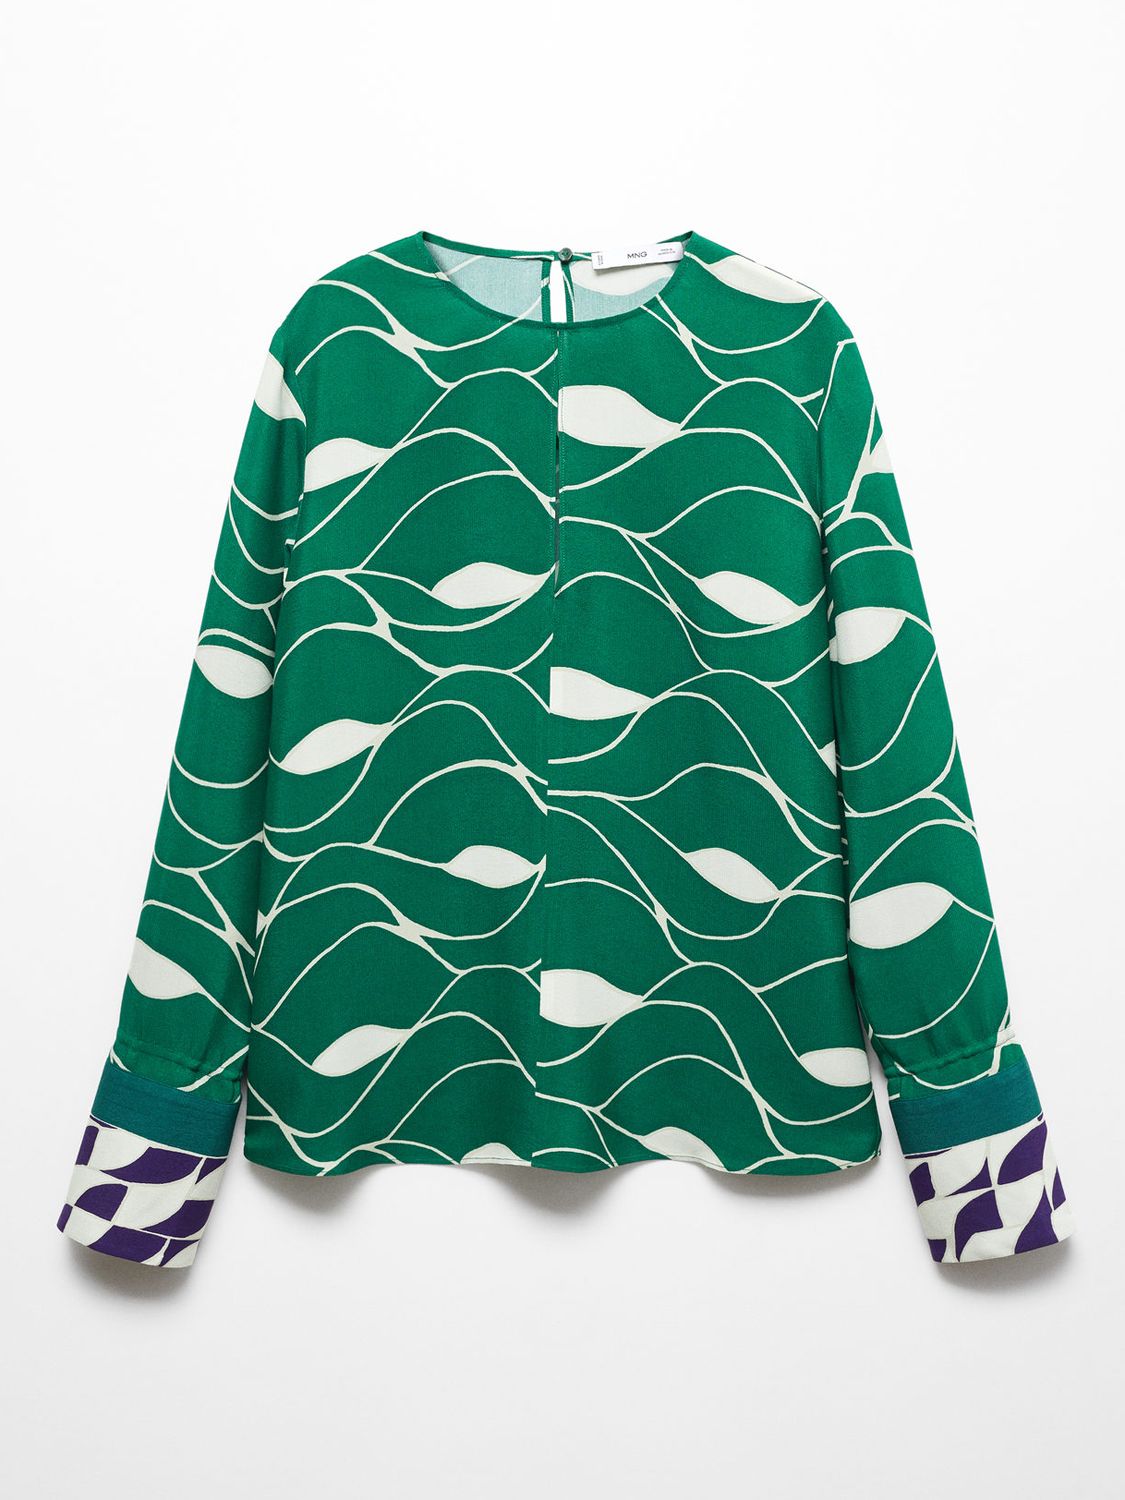 Buy Mango Bow Printed Blouse, Green Online at johnlewis.com